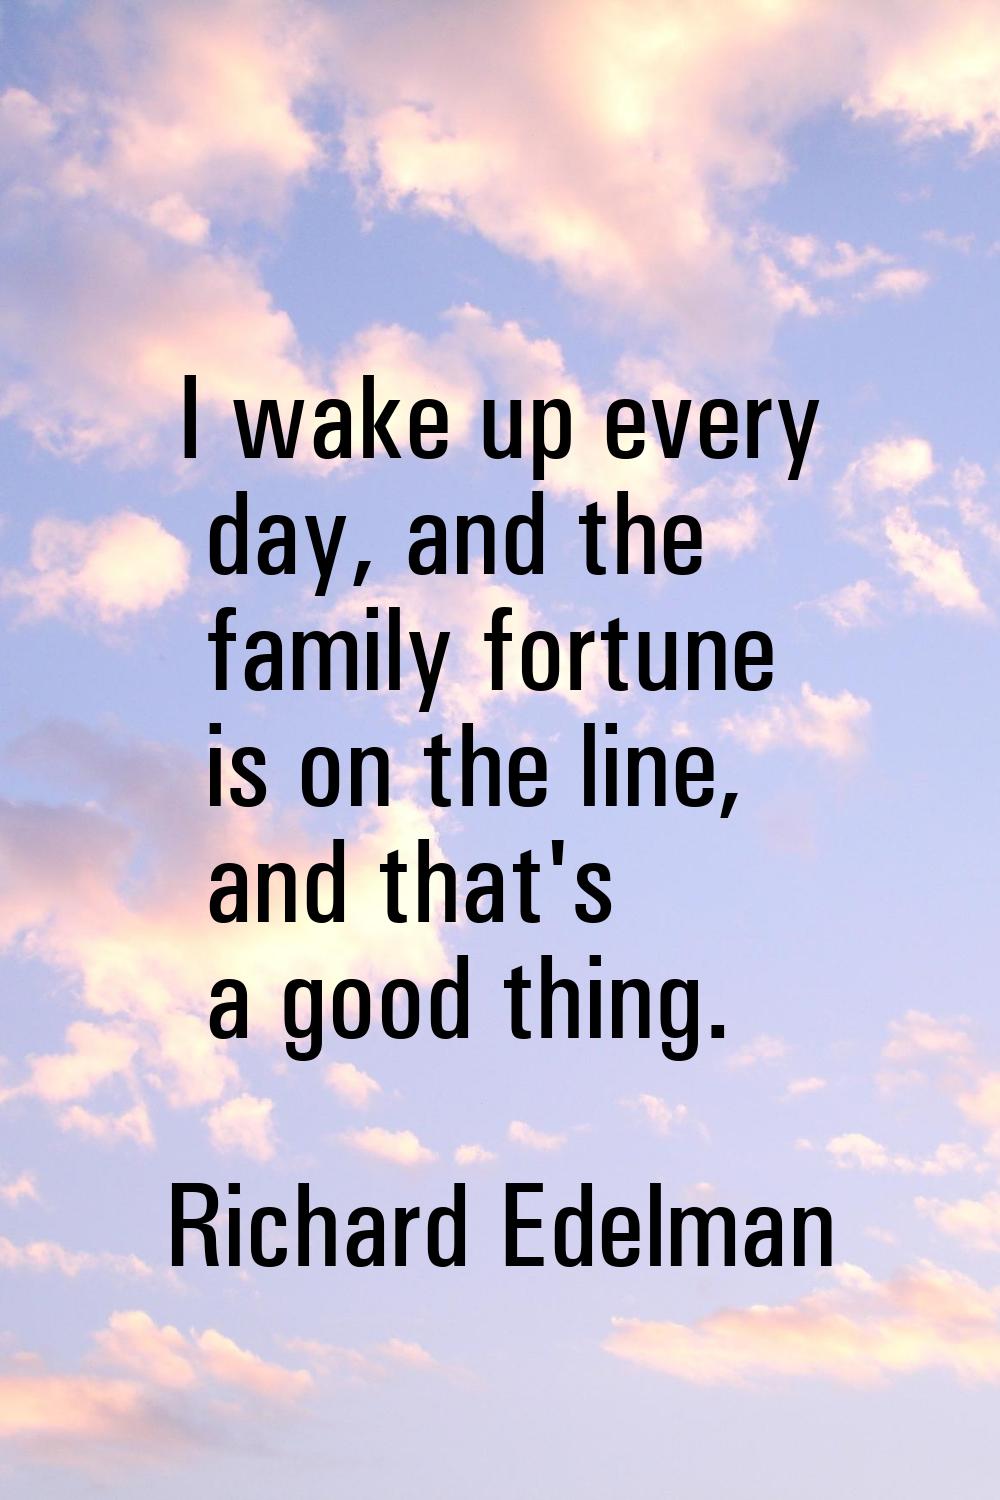 I wake up every day, and the family fortune is on the line, and that's a good thing.